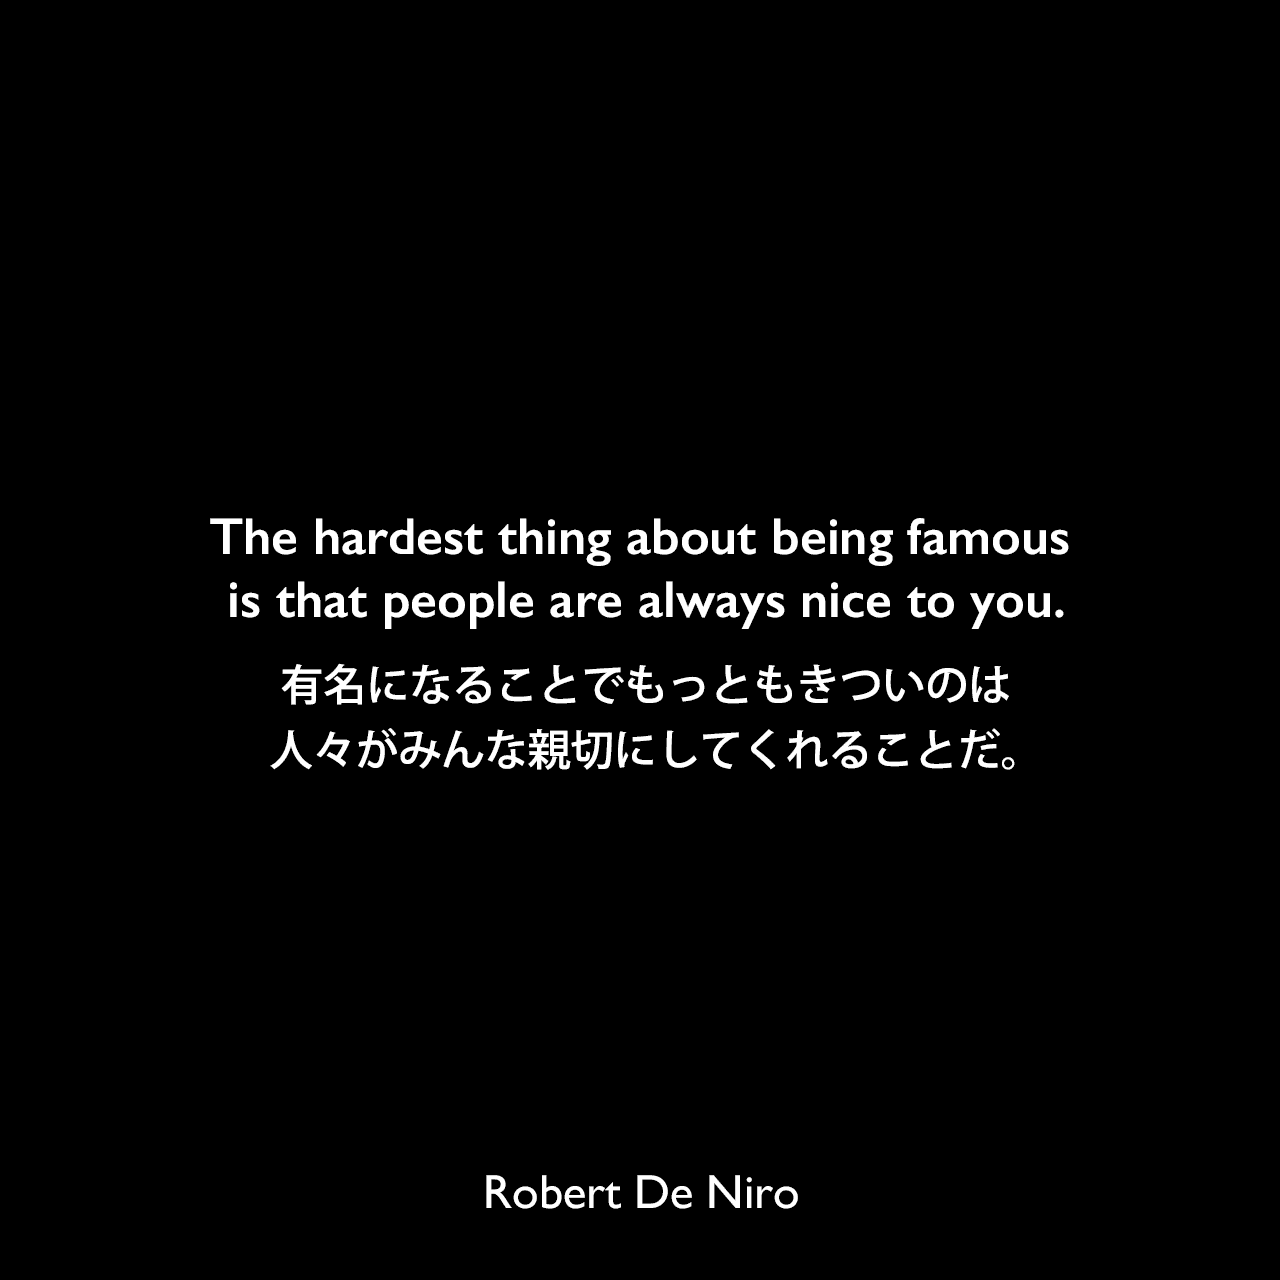 The hardest thing about being famous is that people are always nice to you.有名になることでもっともきついのは、人々がみんな親切にしてくれることだ。Robert De Niro